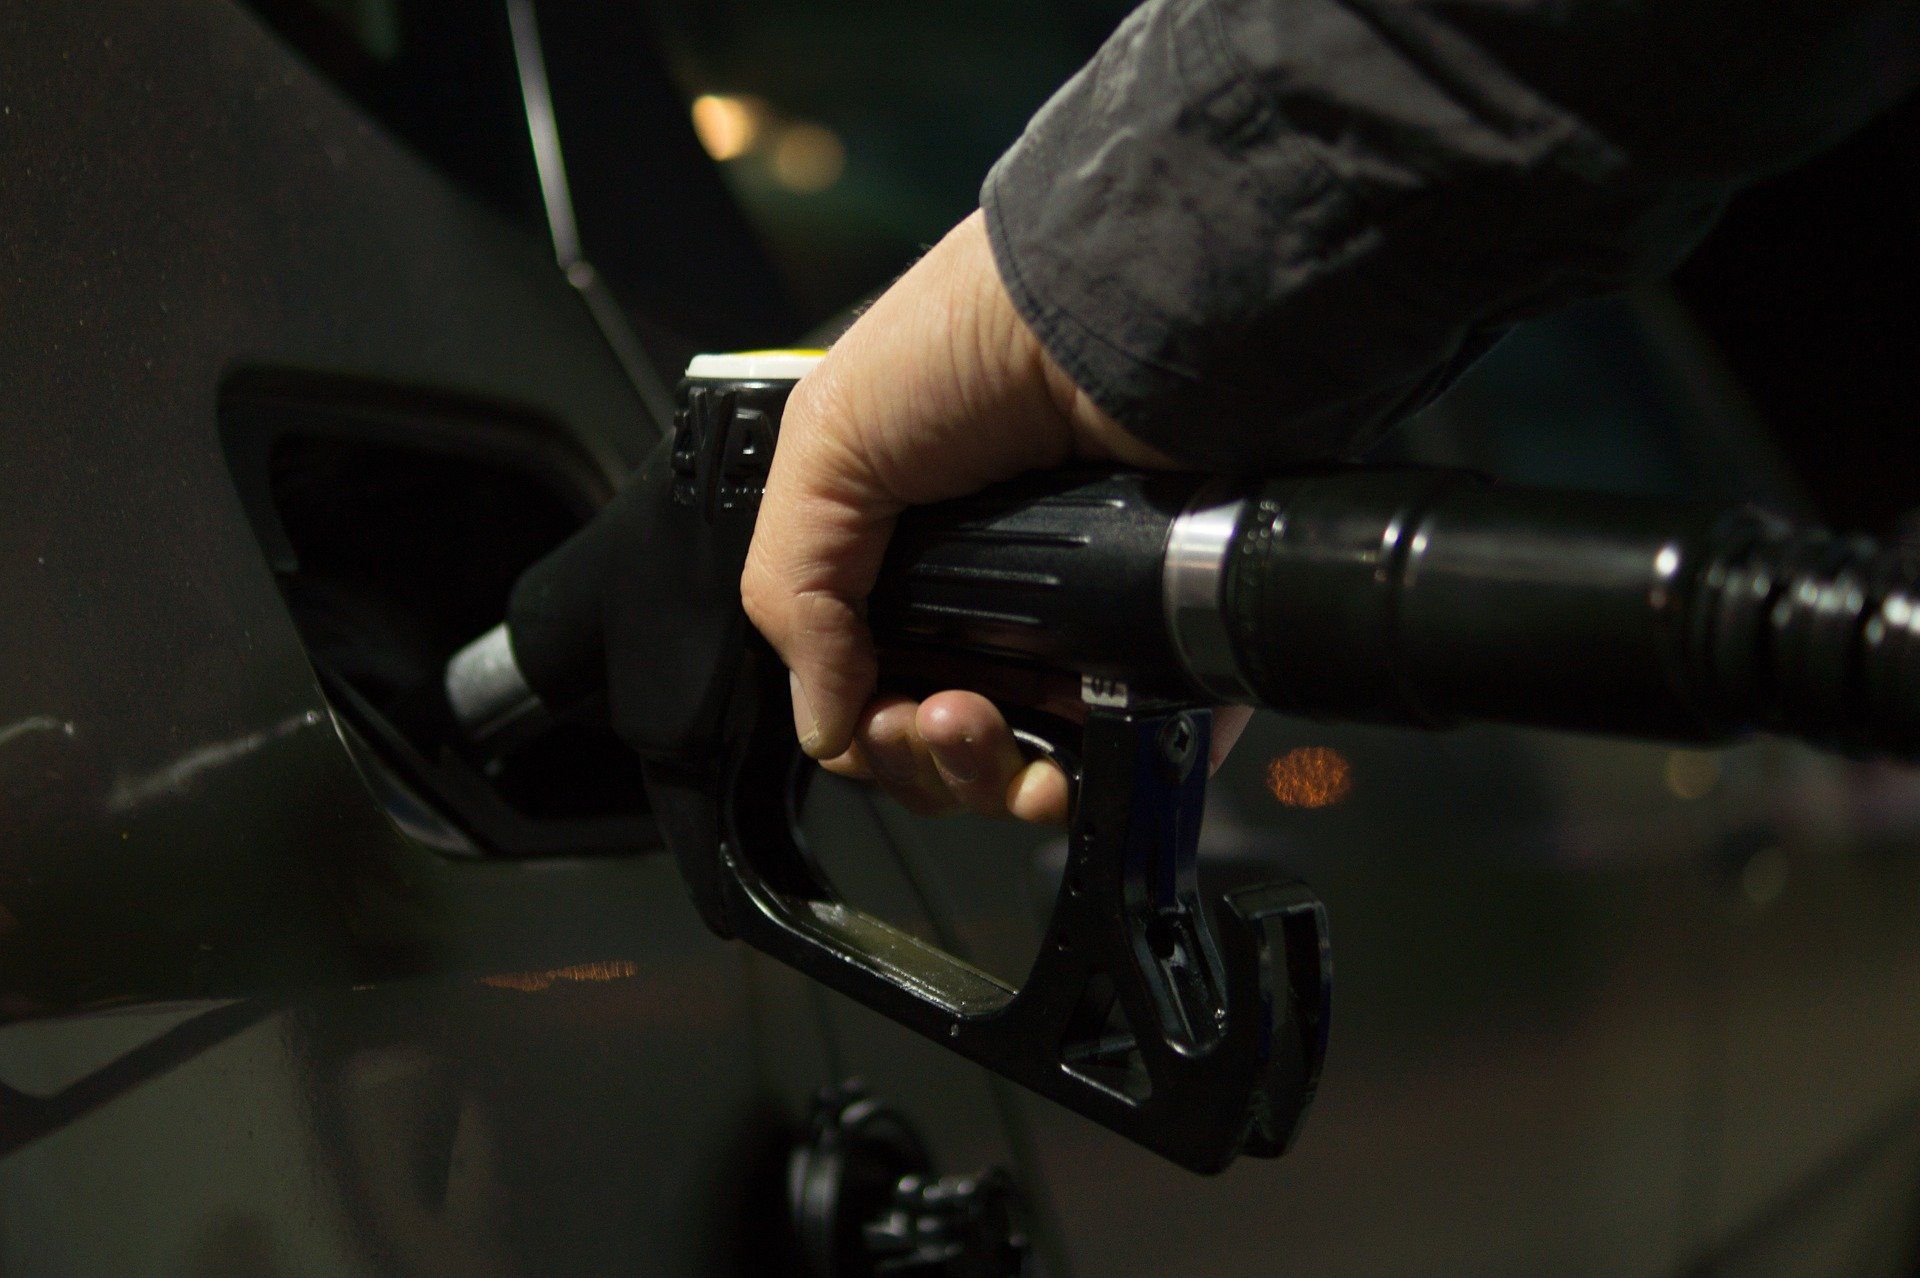 Fuel price today: Petrol and Diesel rates remain unchanged on May 6, 2022